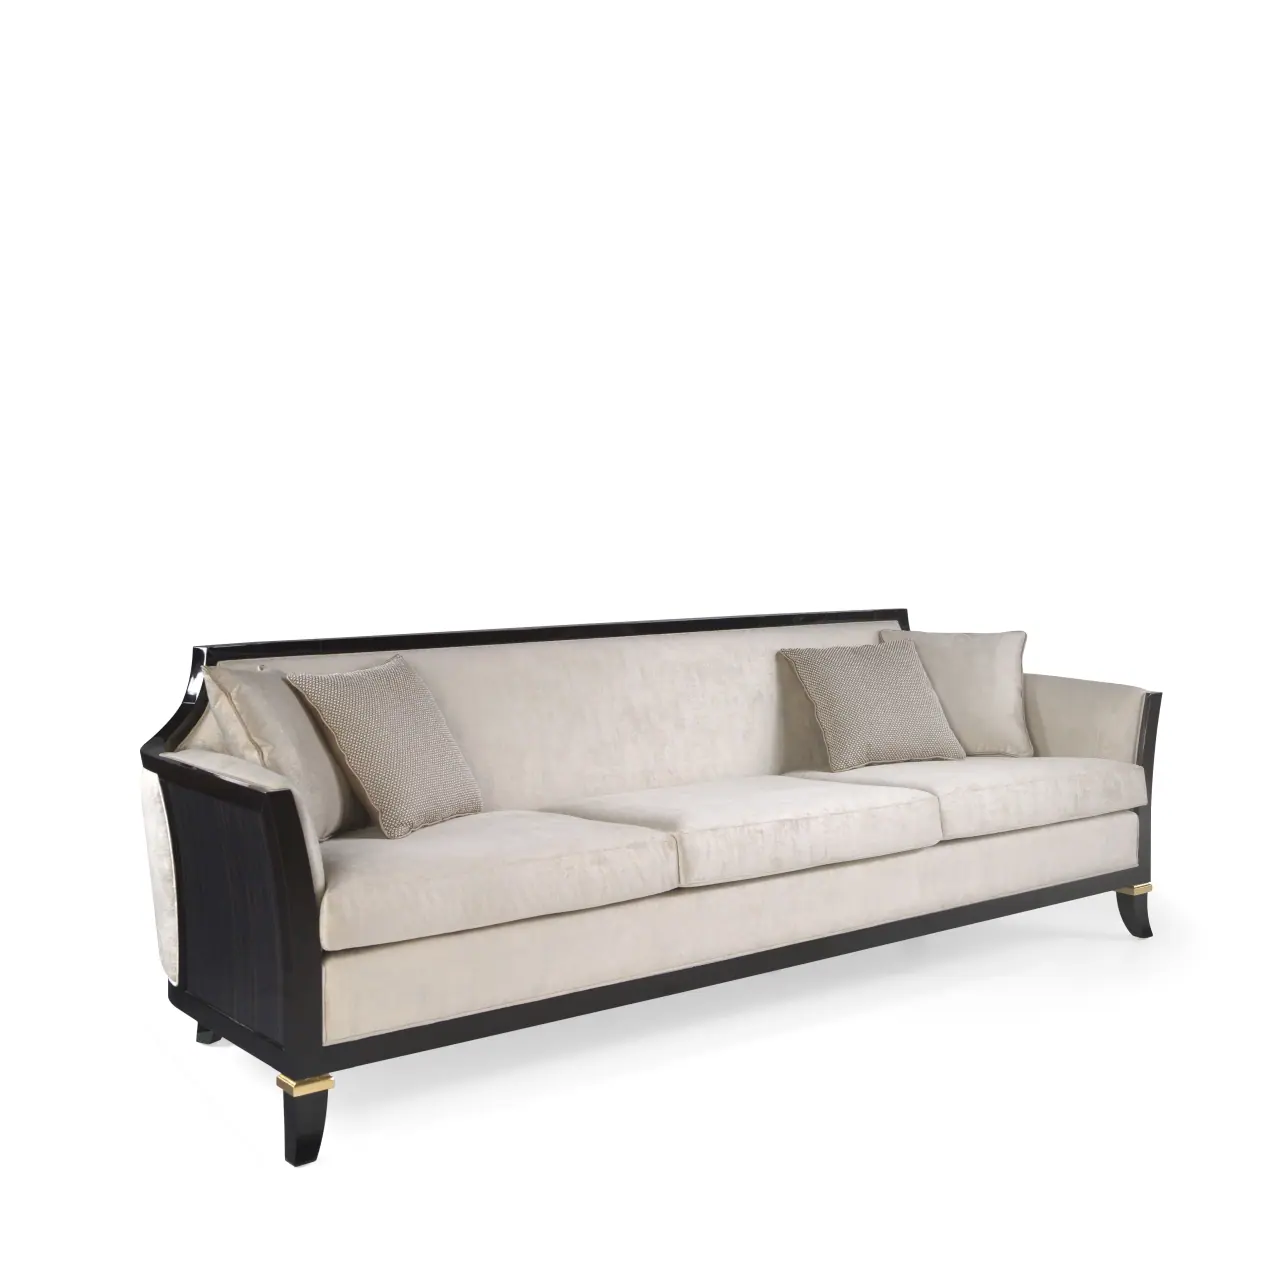 soher-marquis-collection-sofa06